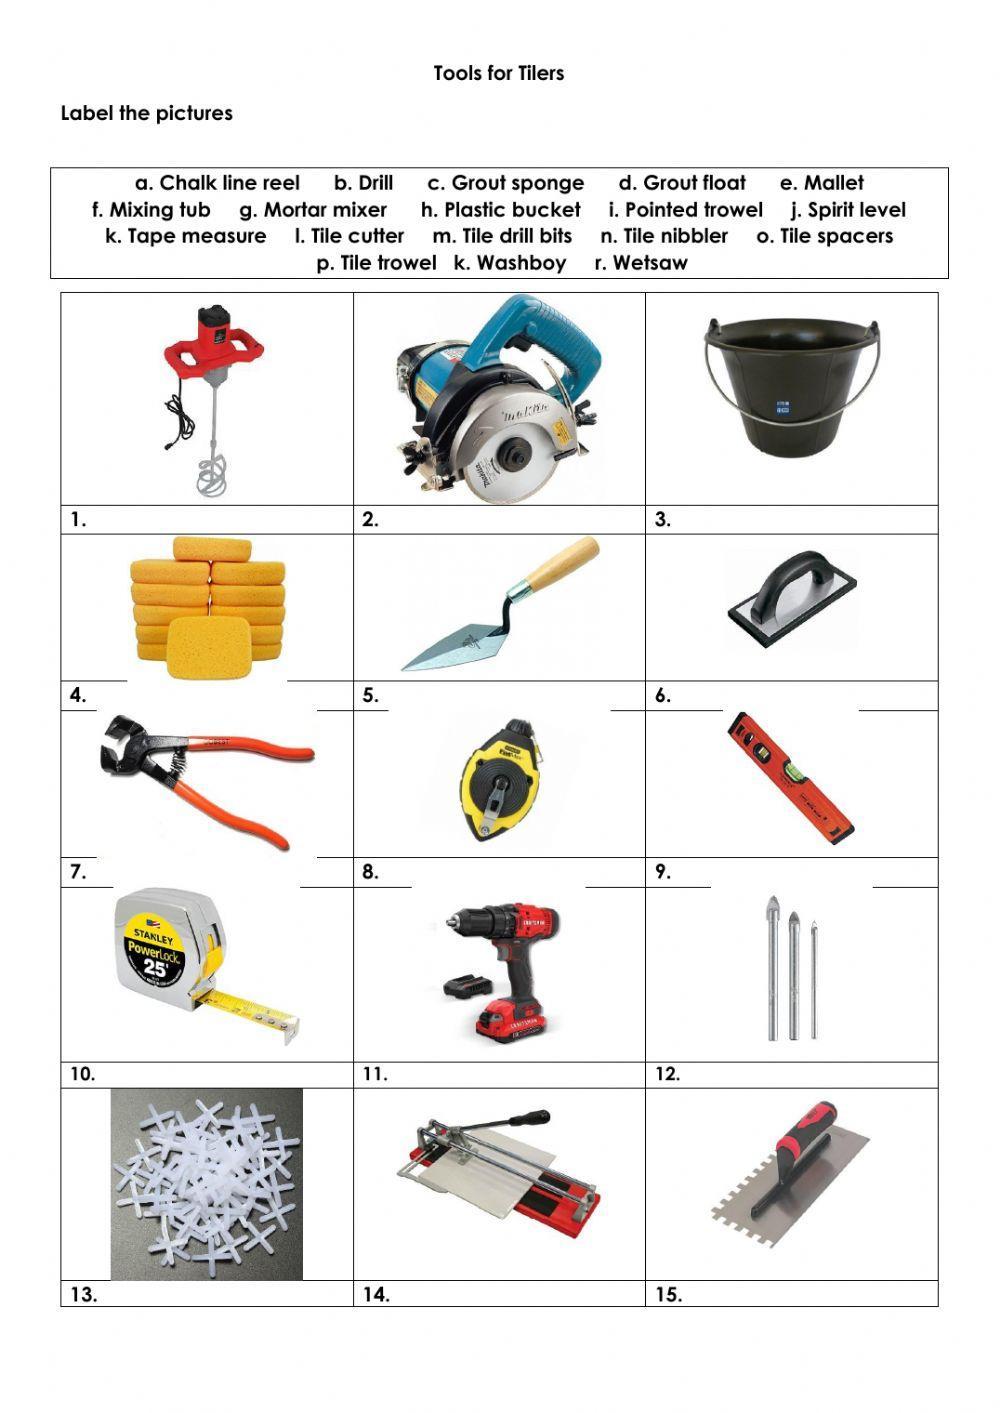 Tools for Tilers